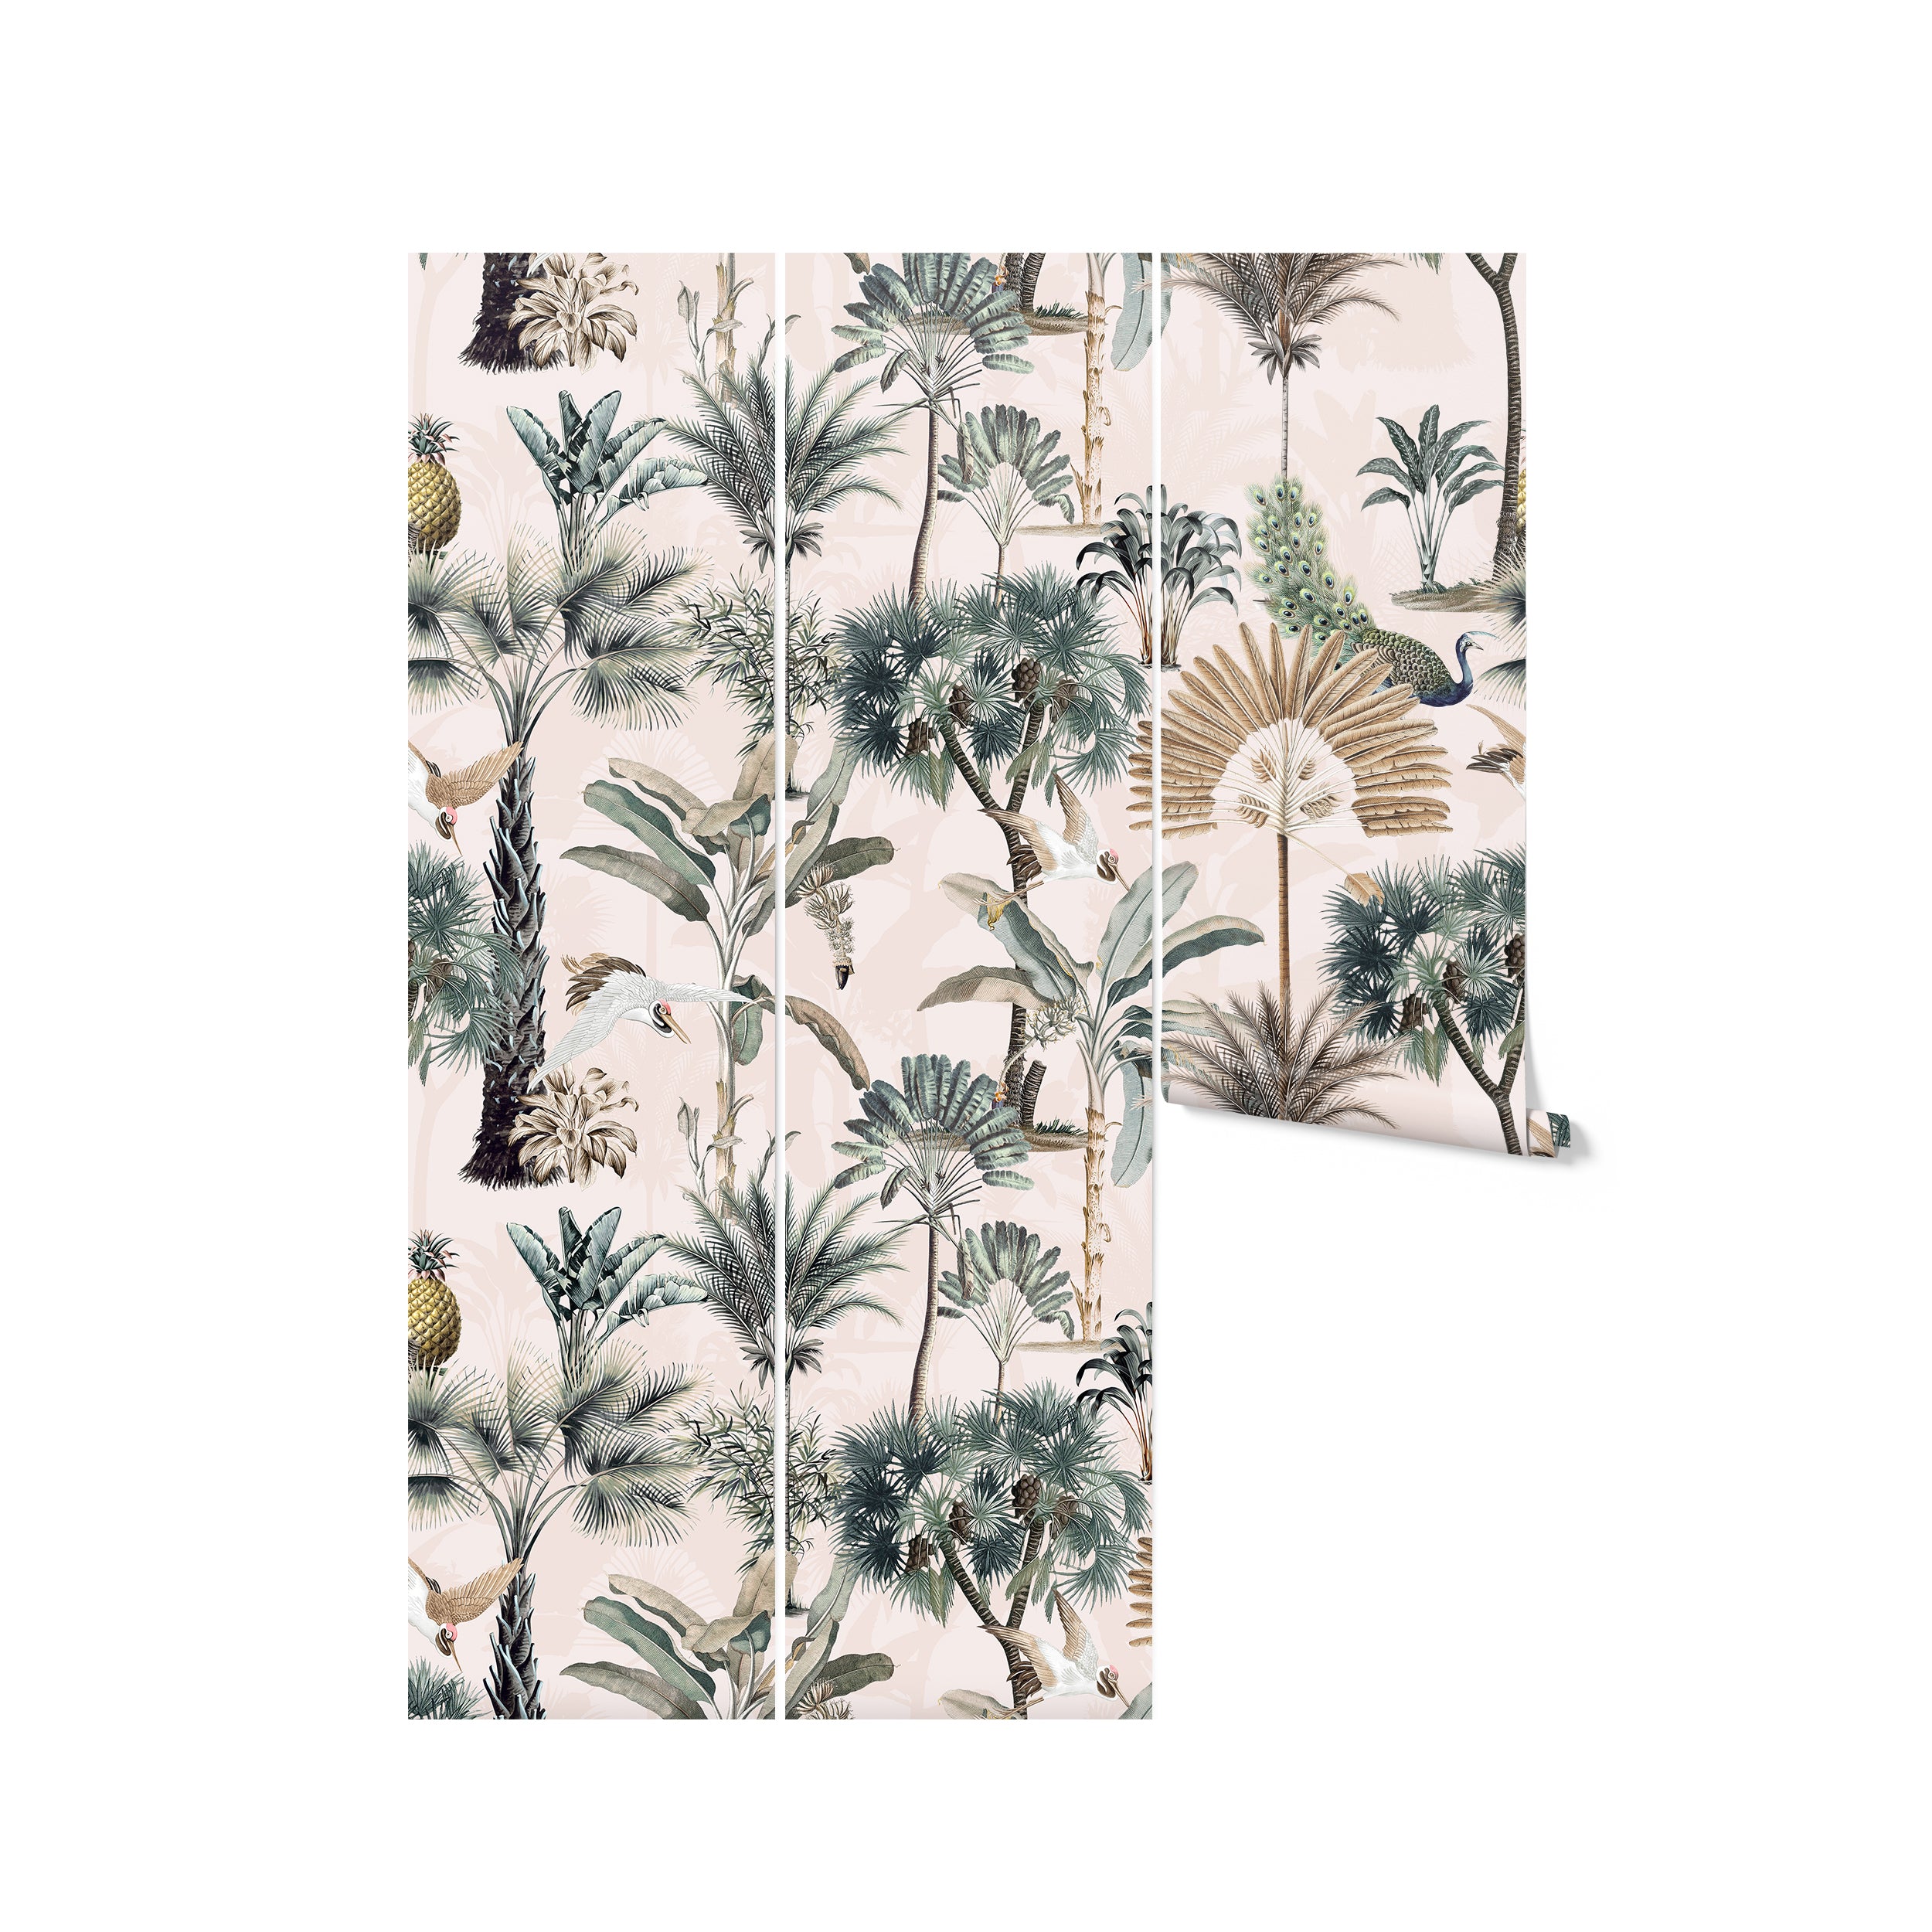 Close-up of Exotic Tropical Wallpaper roll highlighting intricate details of tropical plants and birds in a natural palette.